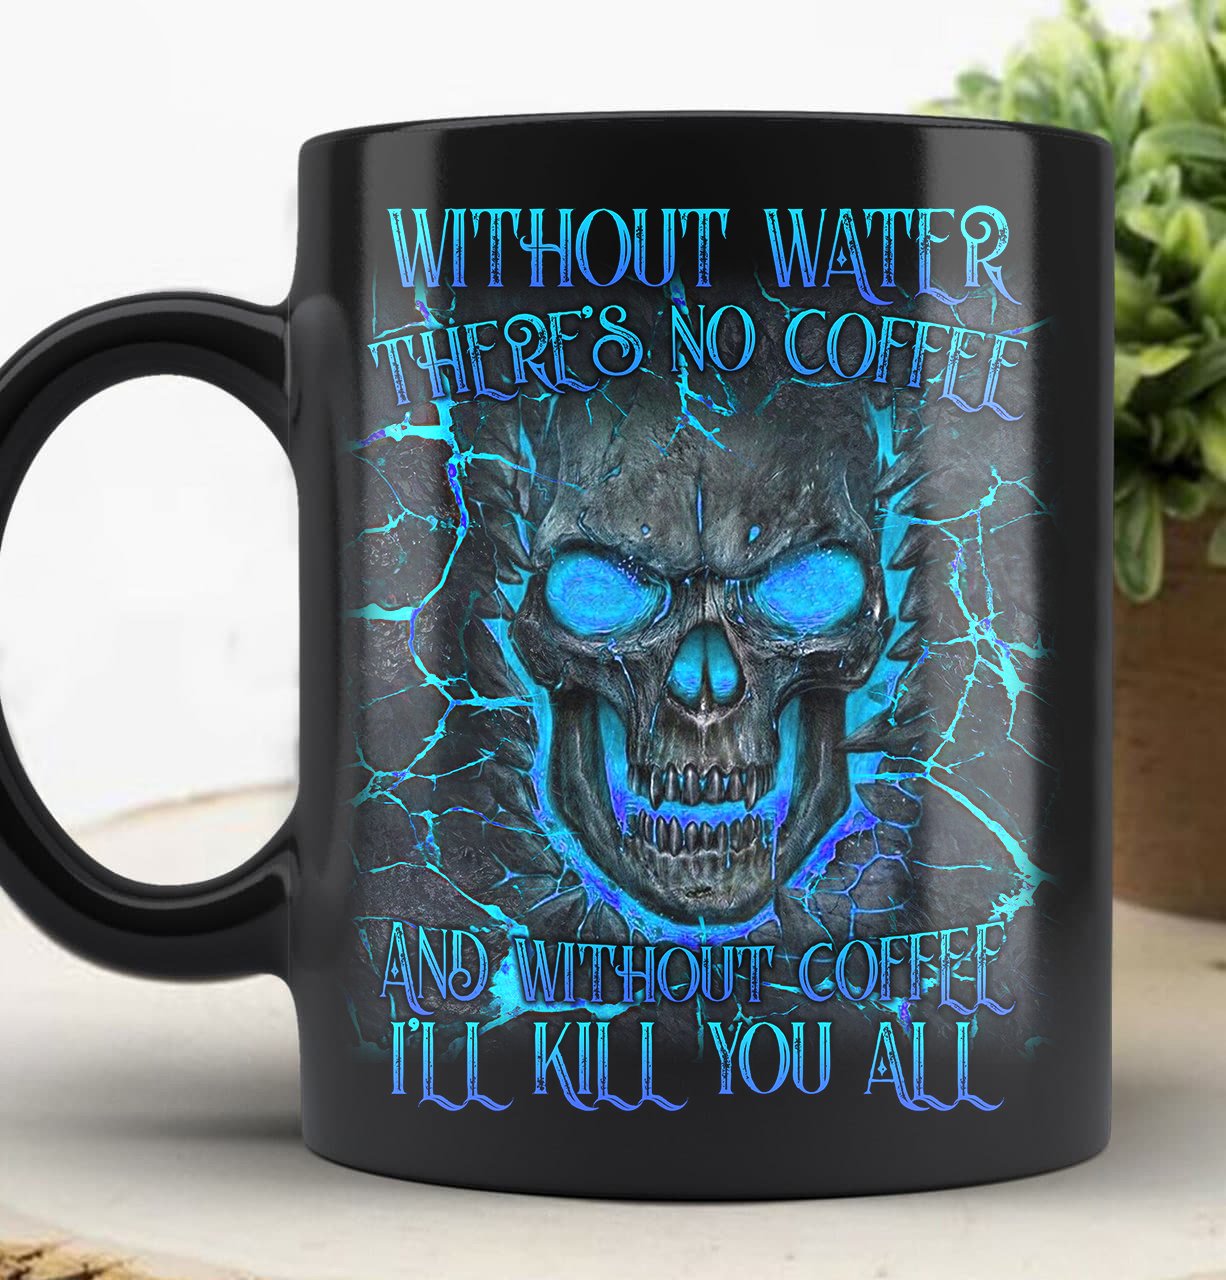 Blue Lightning Skull without water theres no coffee Mug